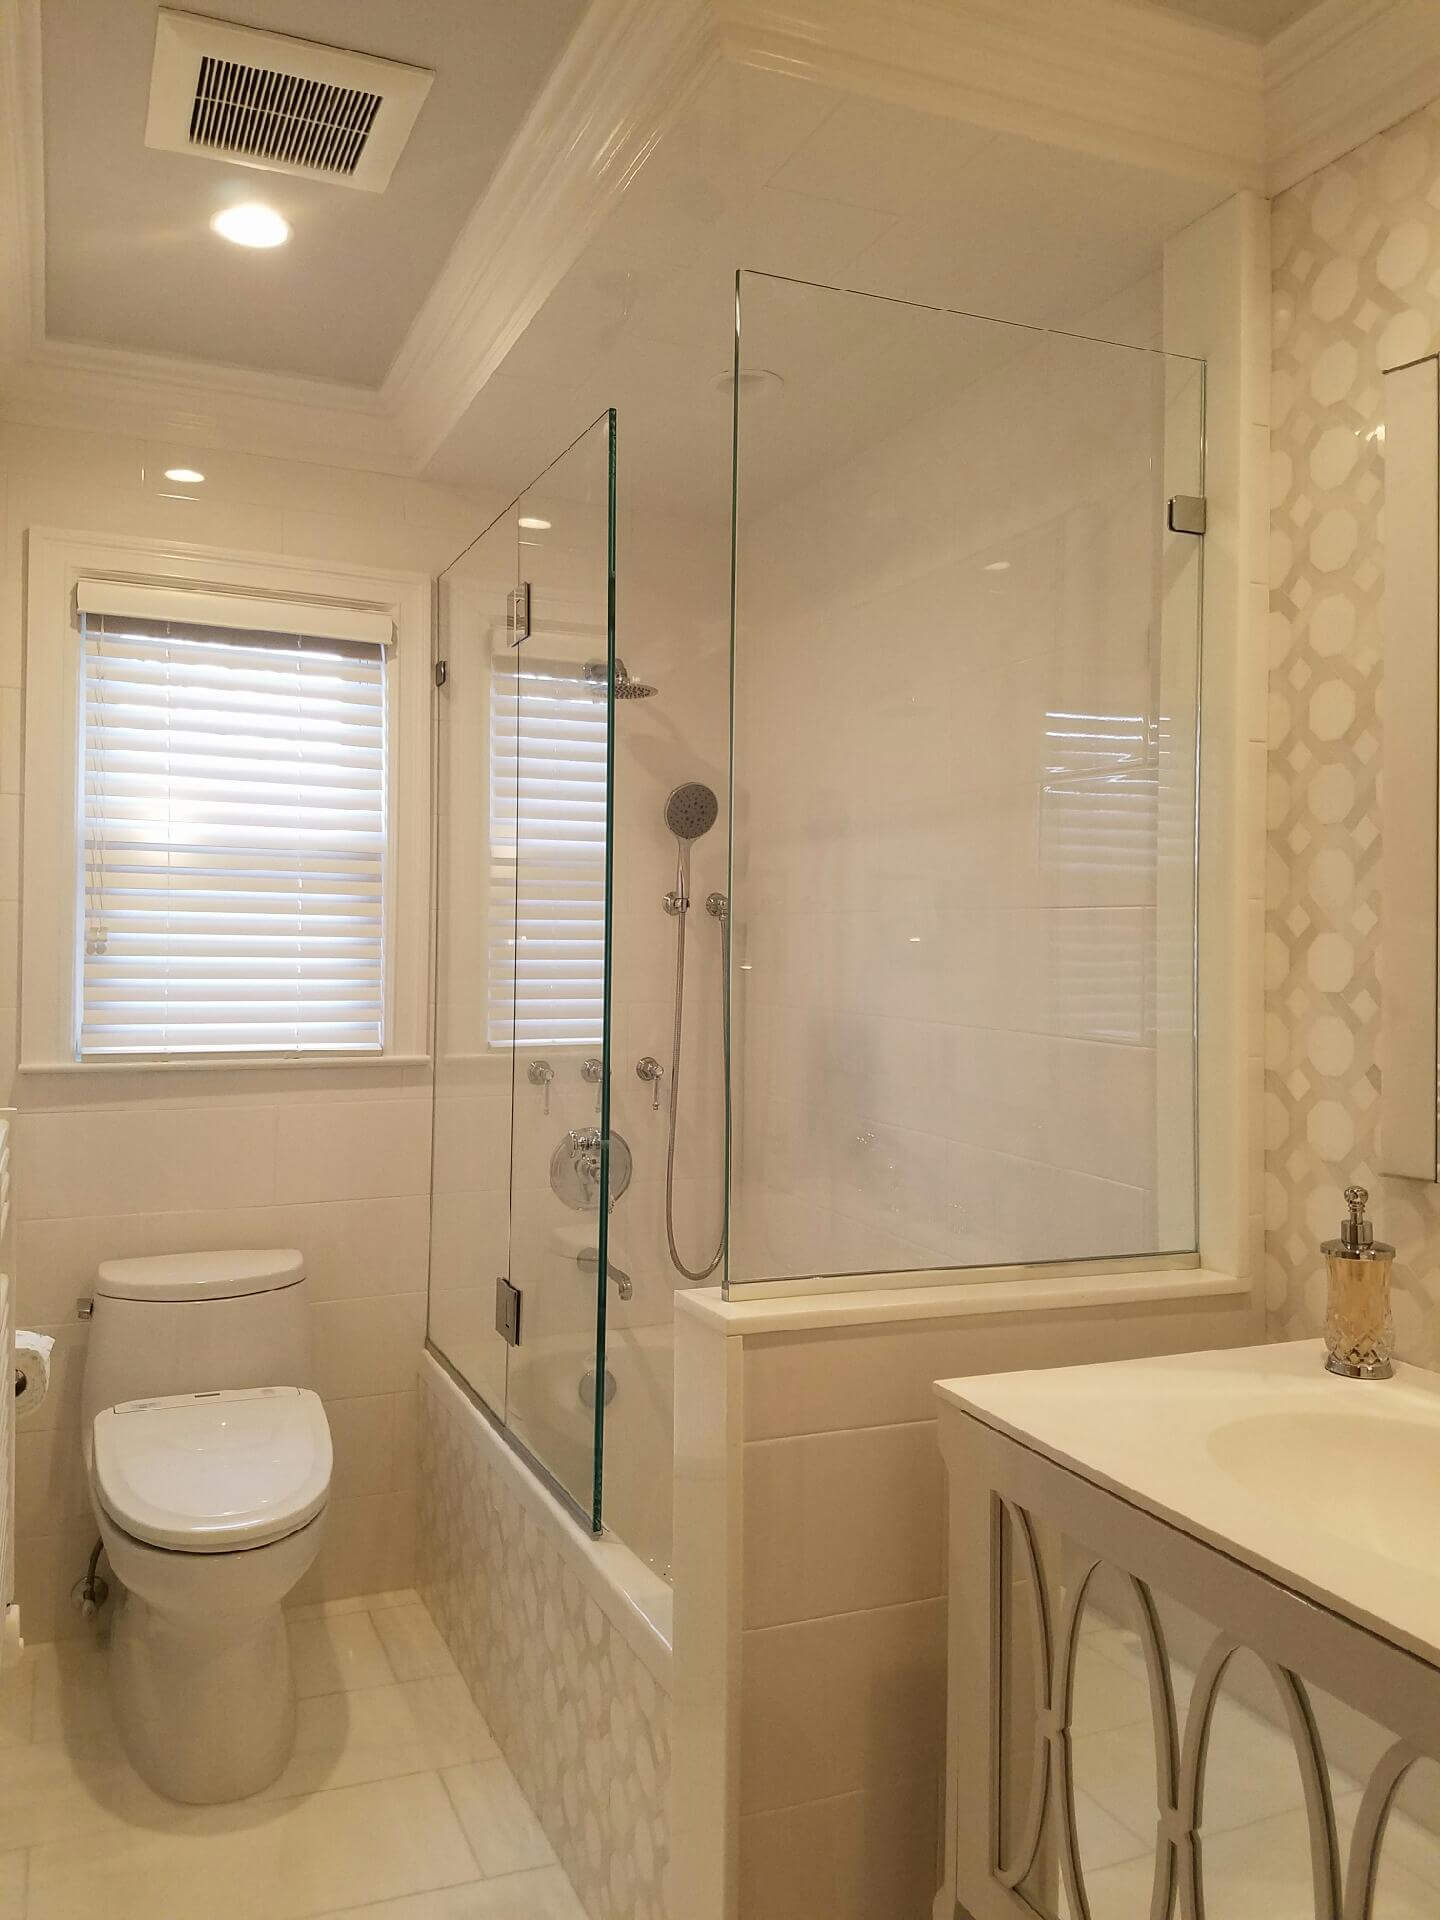 frameless glass shower with white toilet, bath, and window with blinds closed